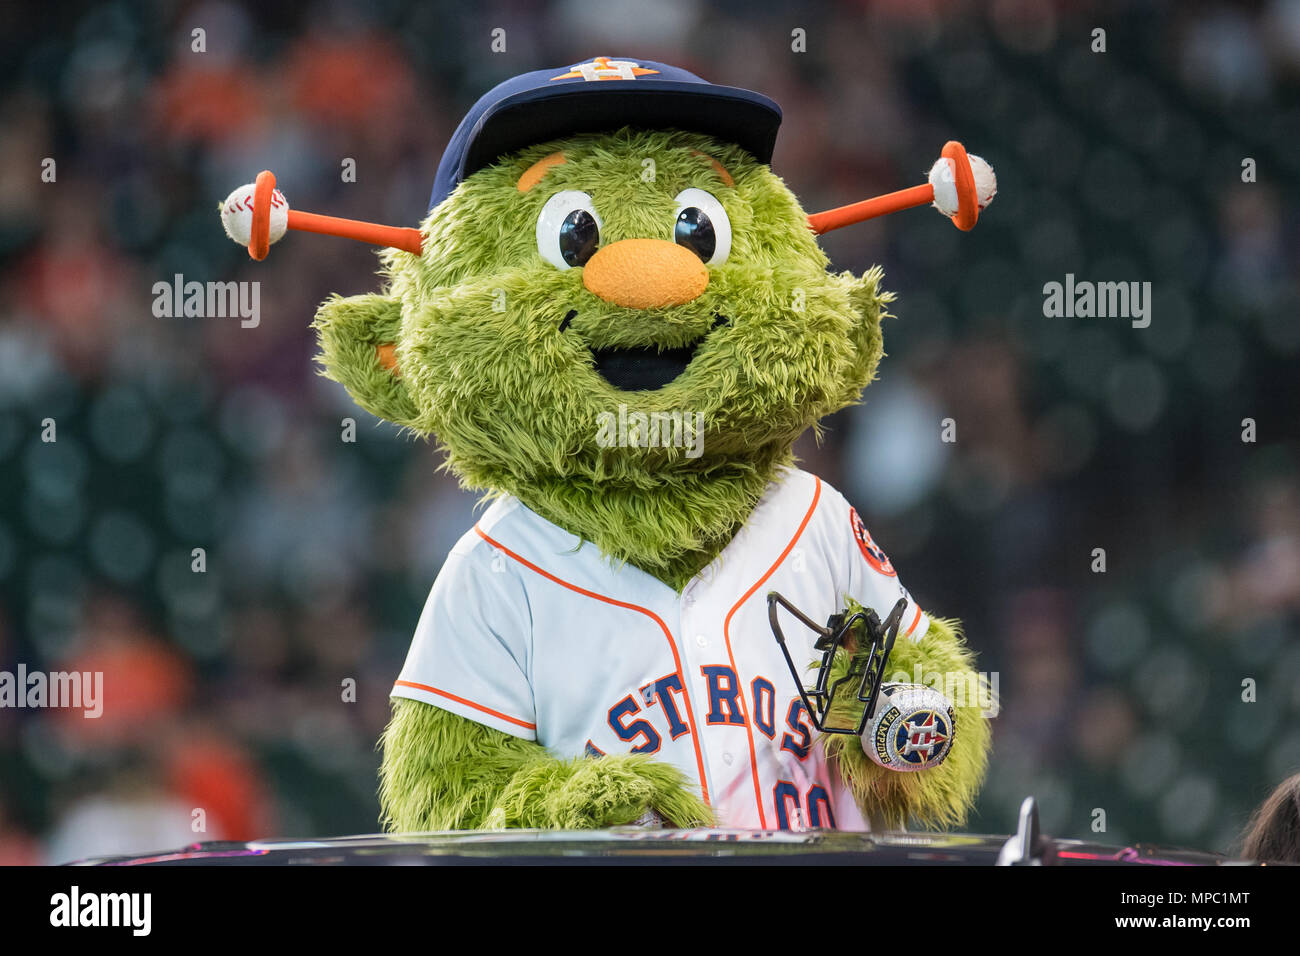 May 19, 2018: Houston Astros mascot Orbit during a Major League